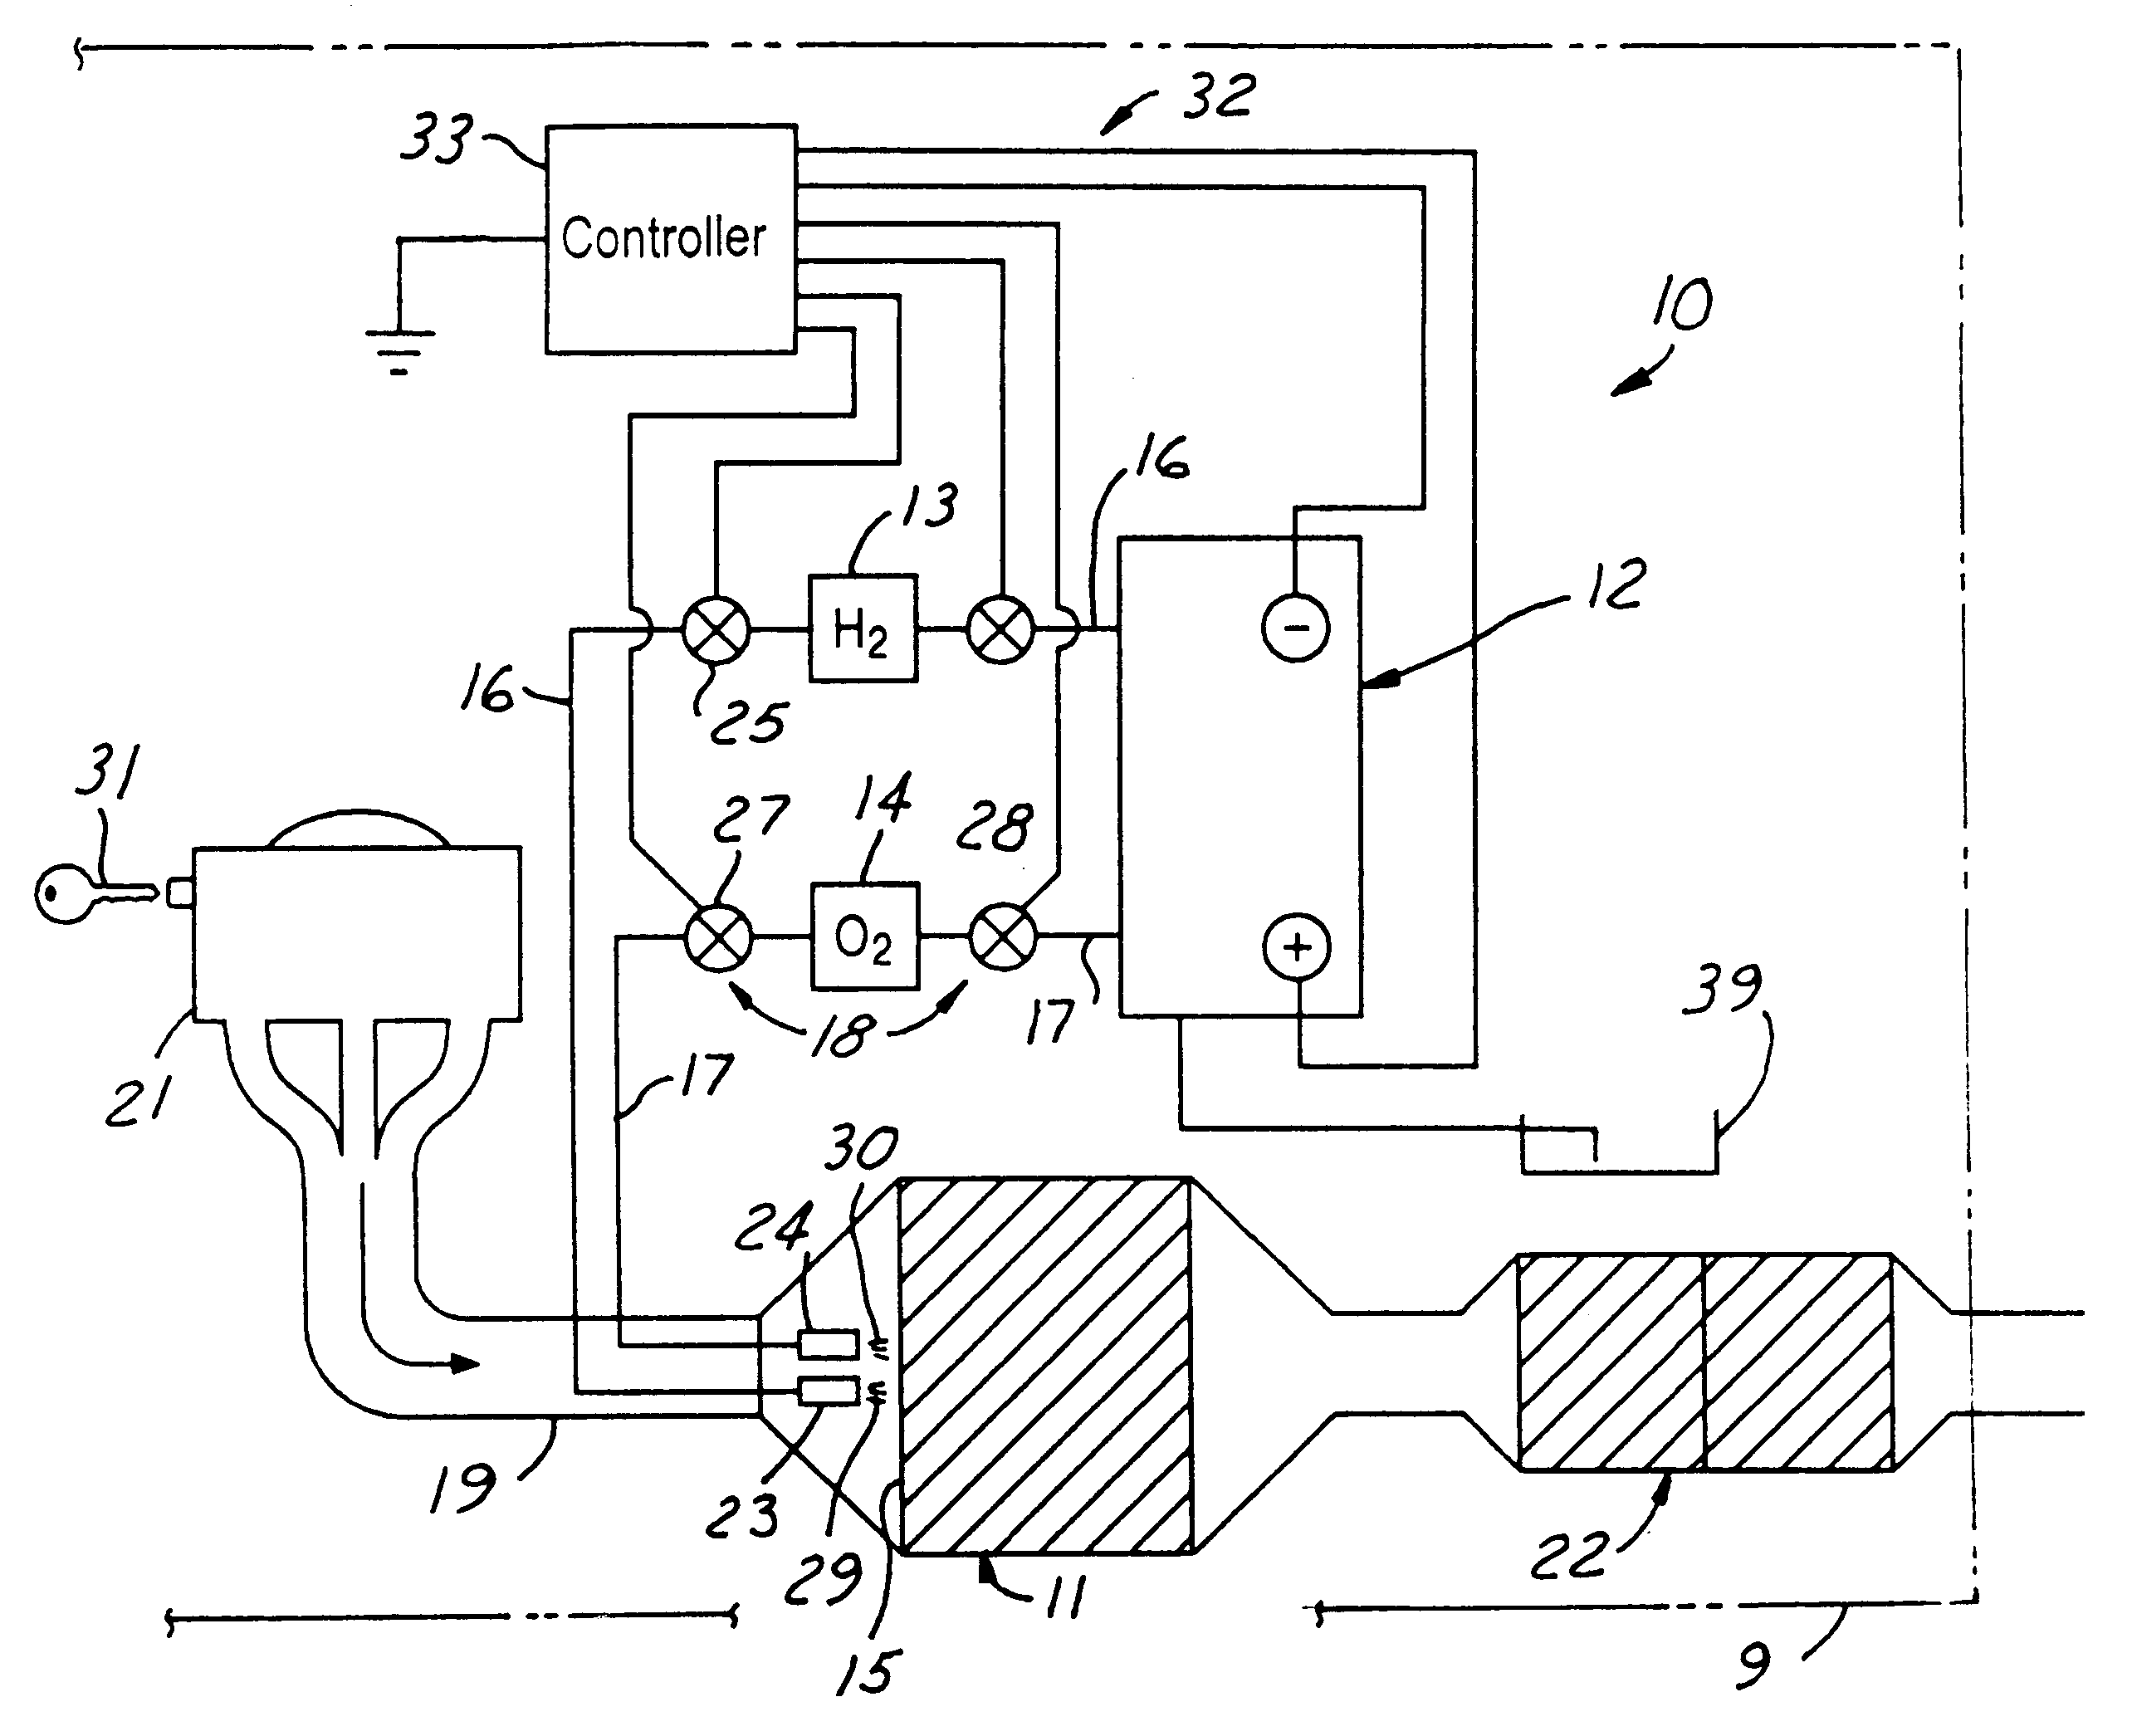 Apparatus and method for heating an automotive catalyst to an emission reactive condition